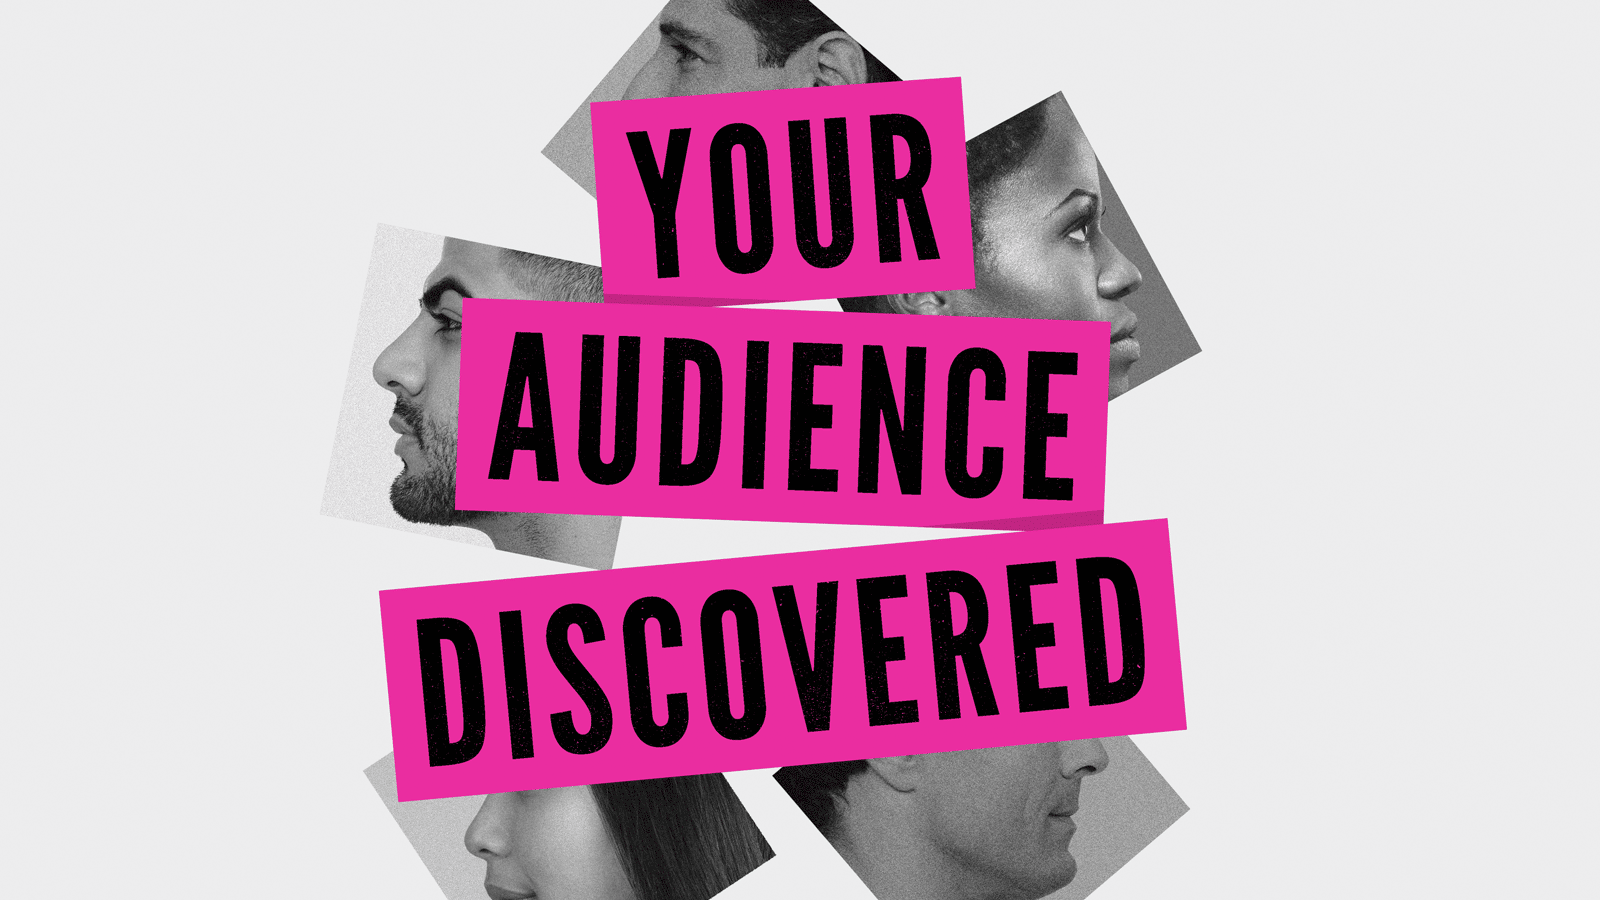 you-audience-discovered-article-header-image